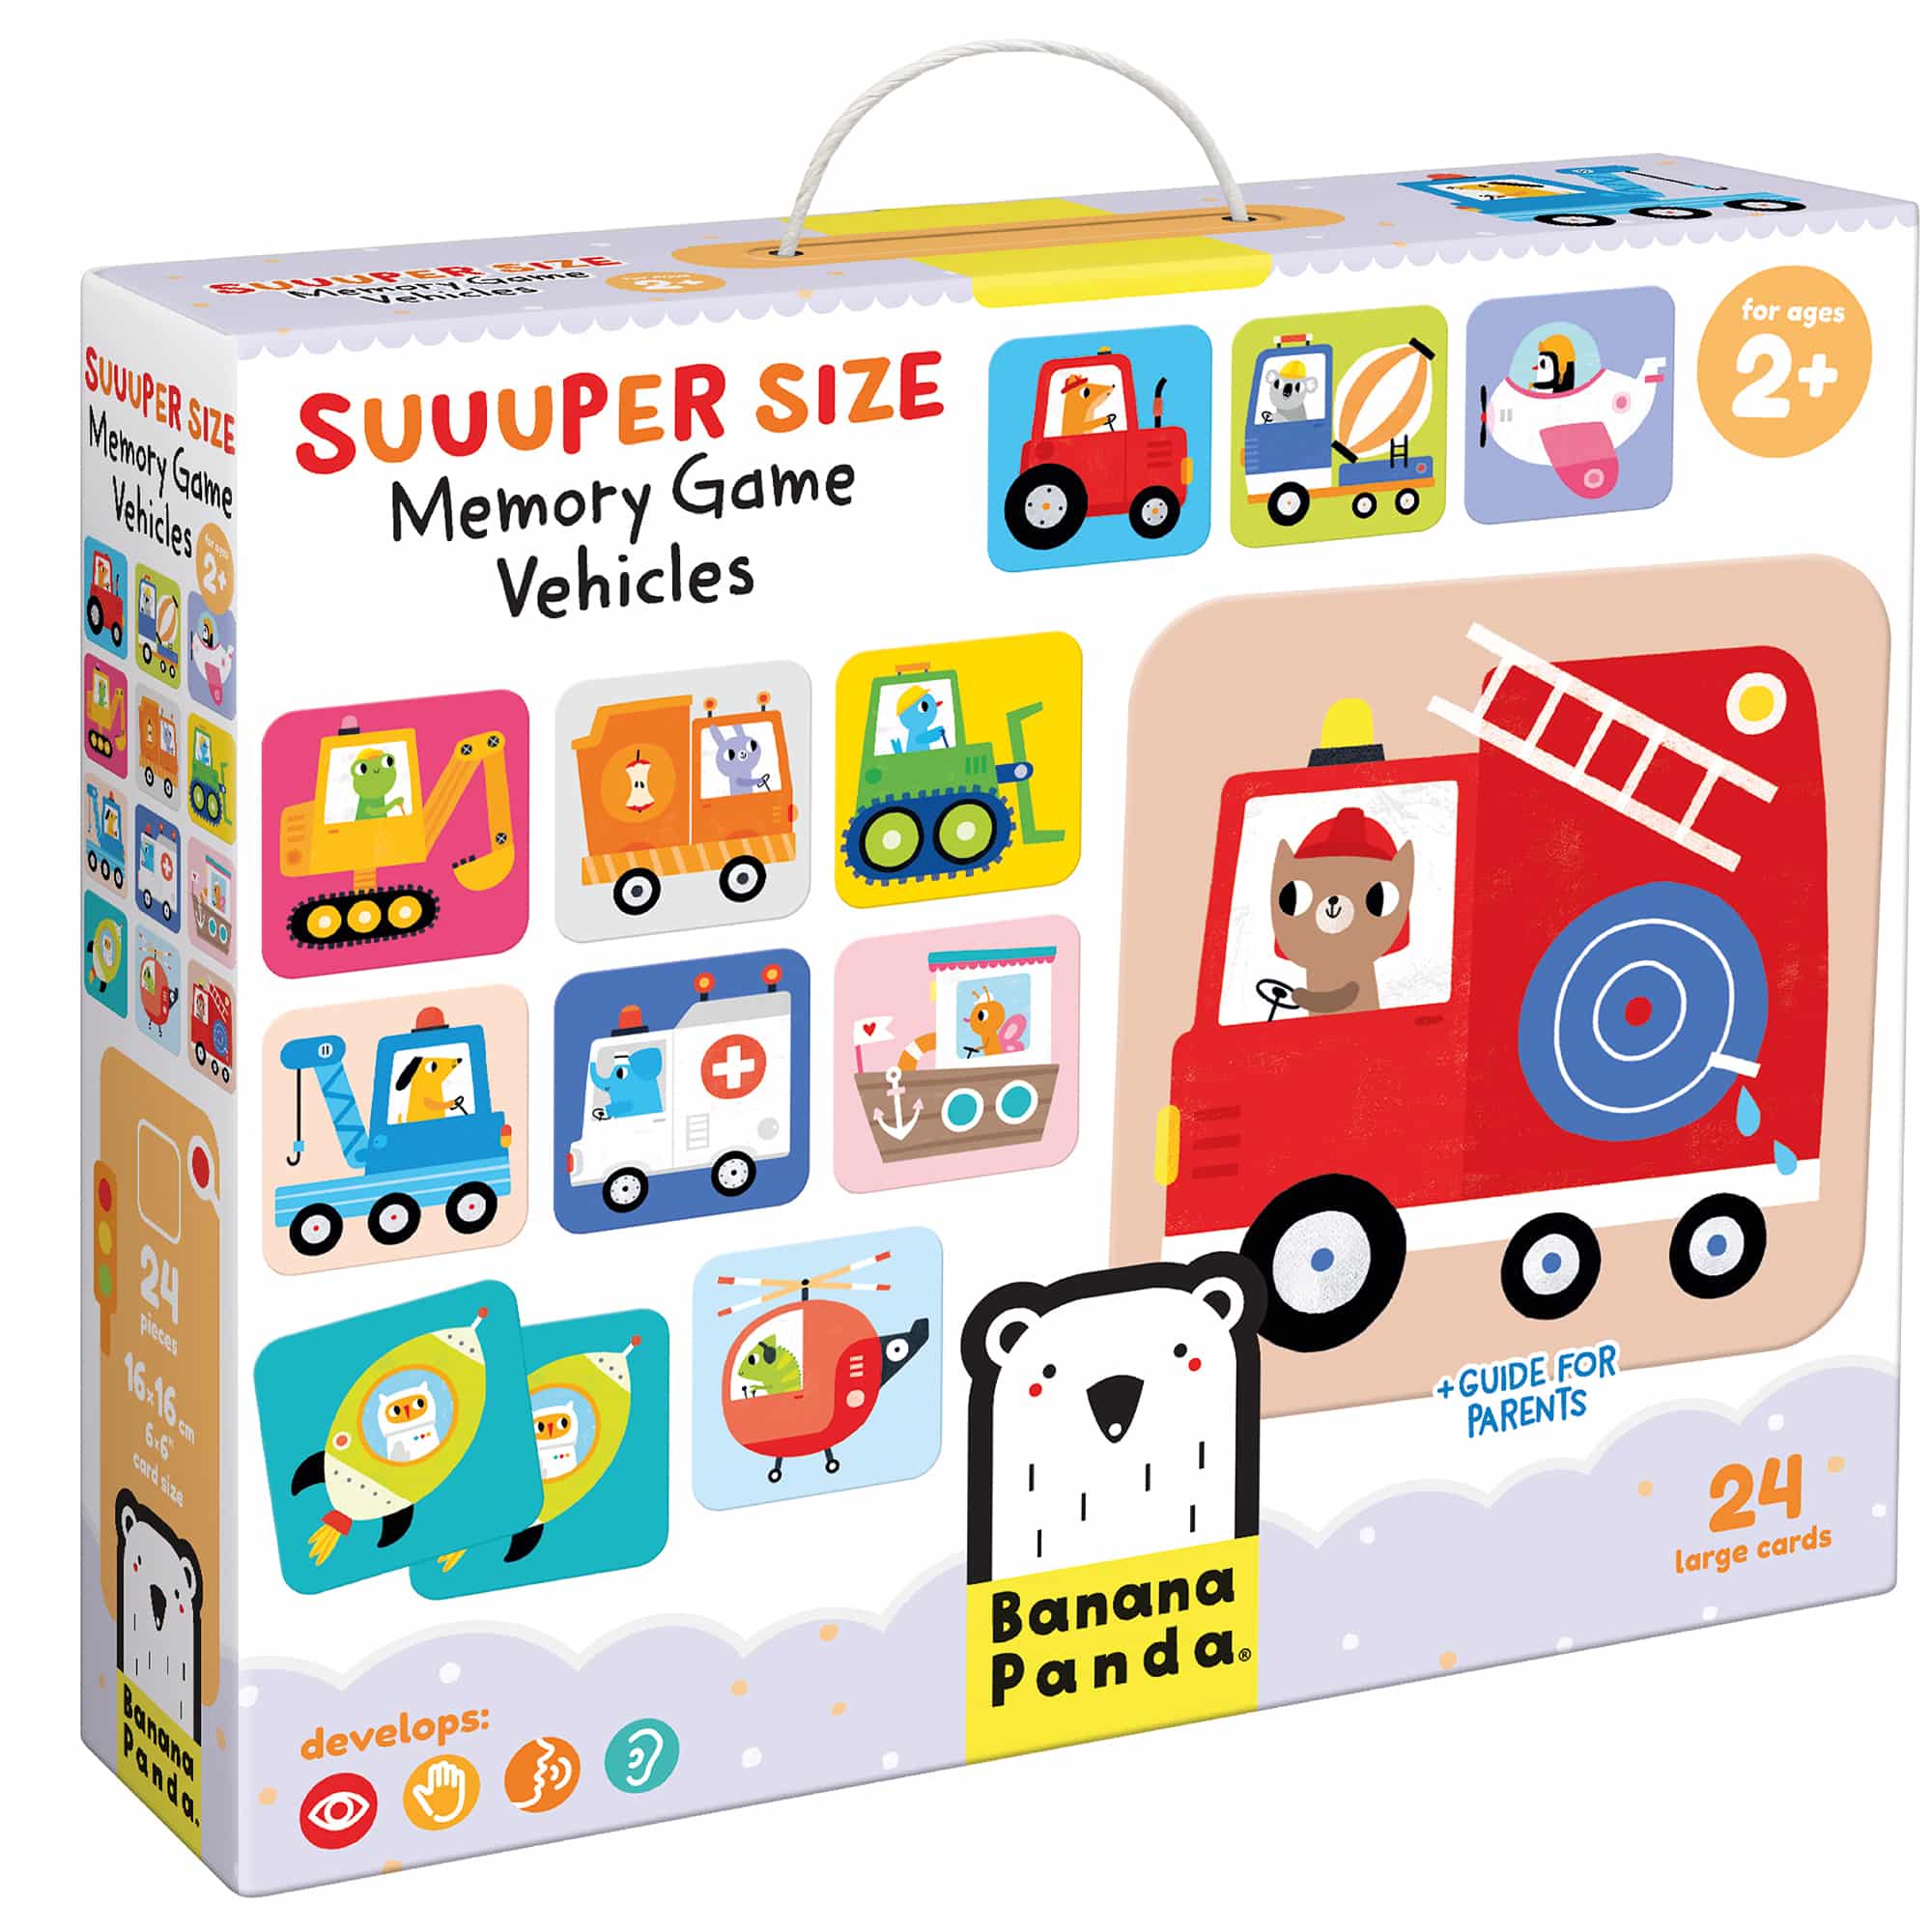 Super Size Memory Game Vehicles